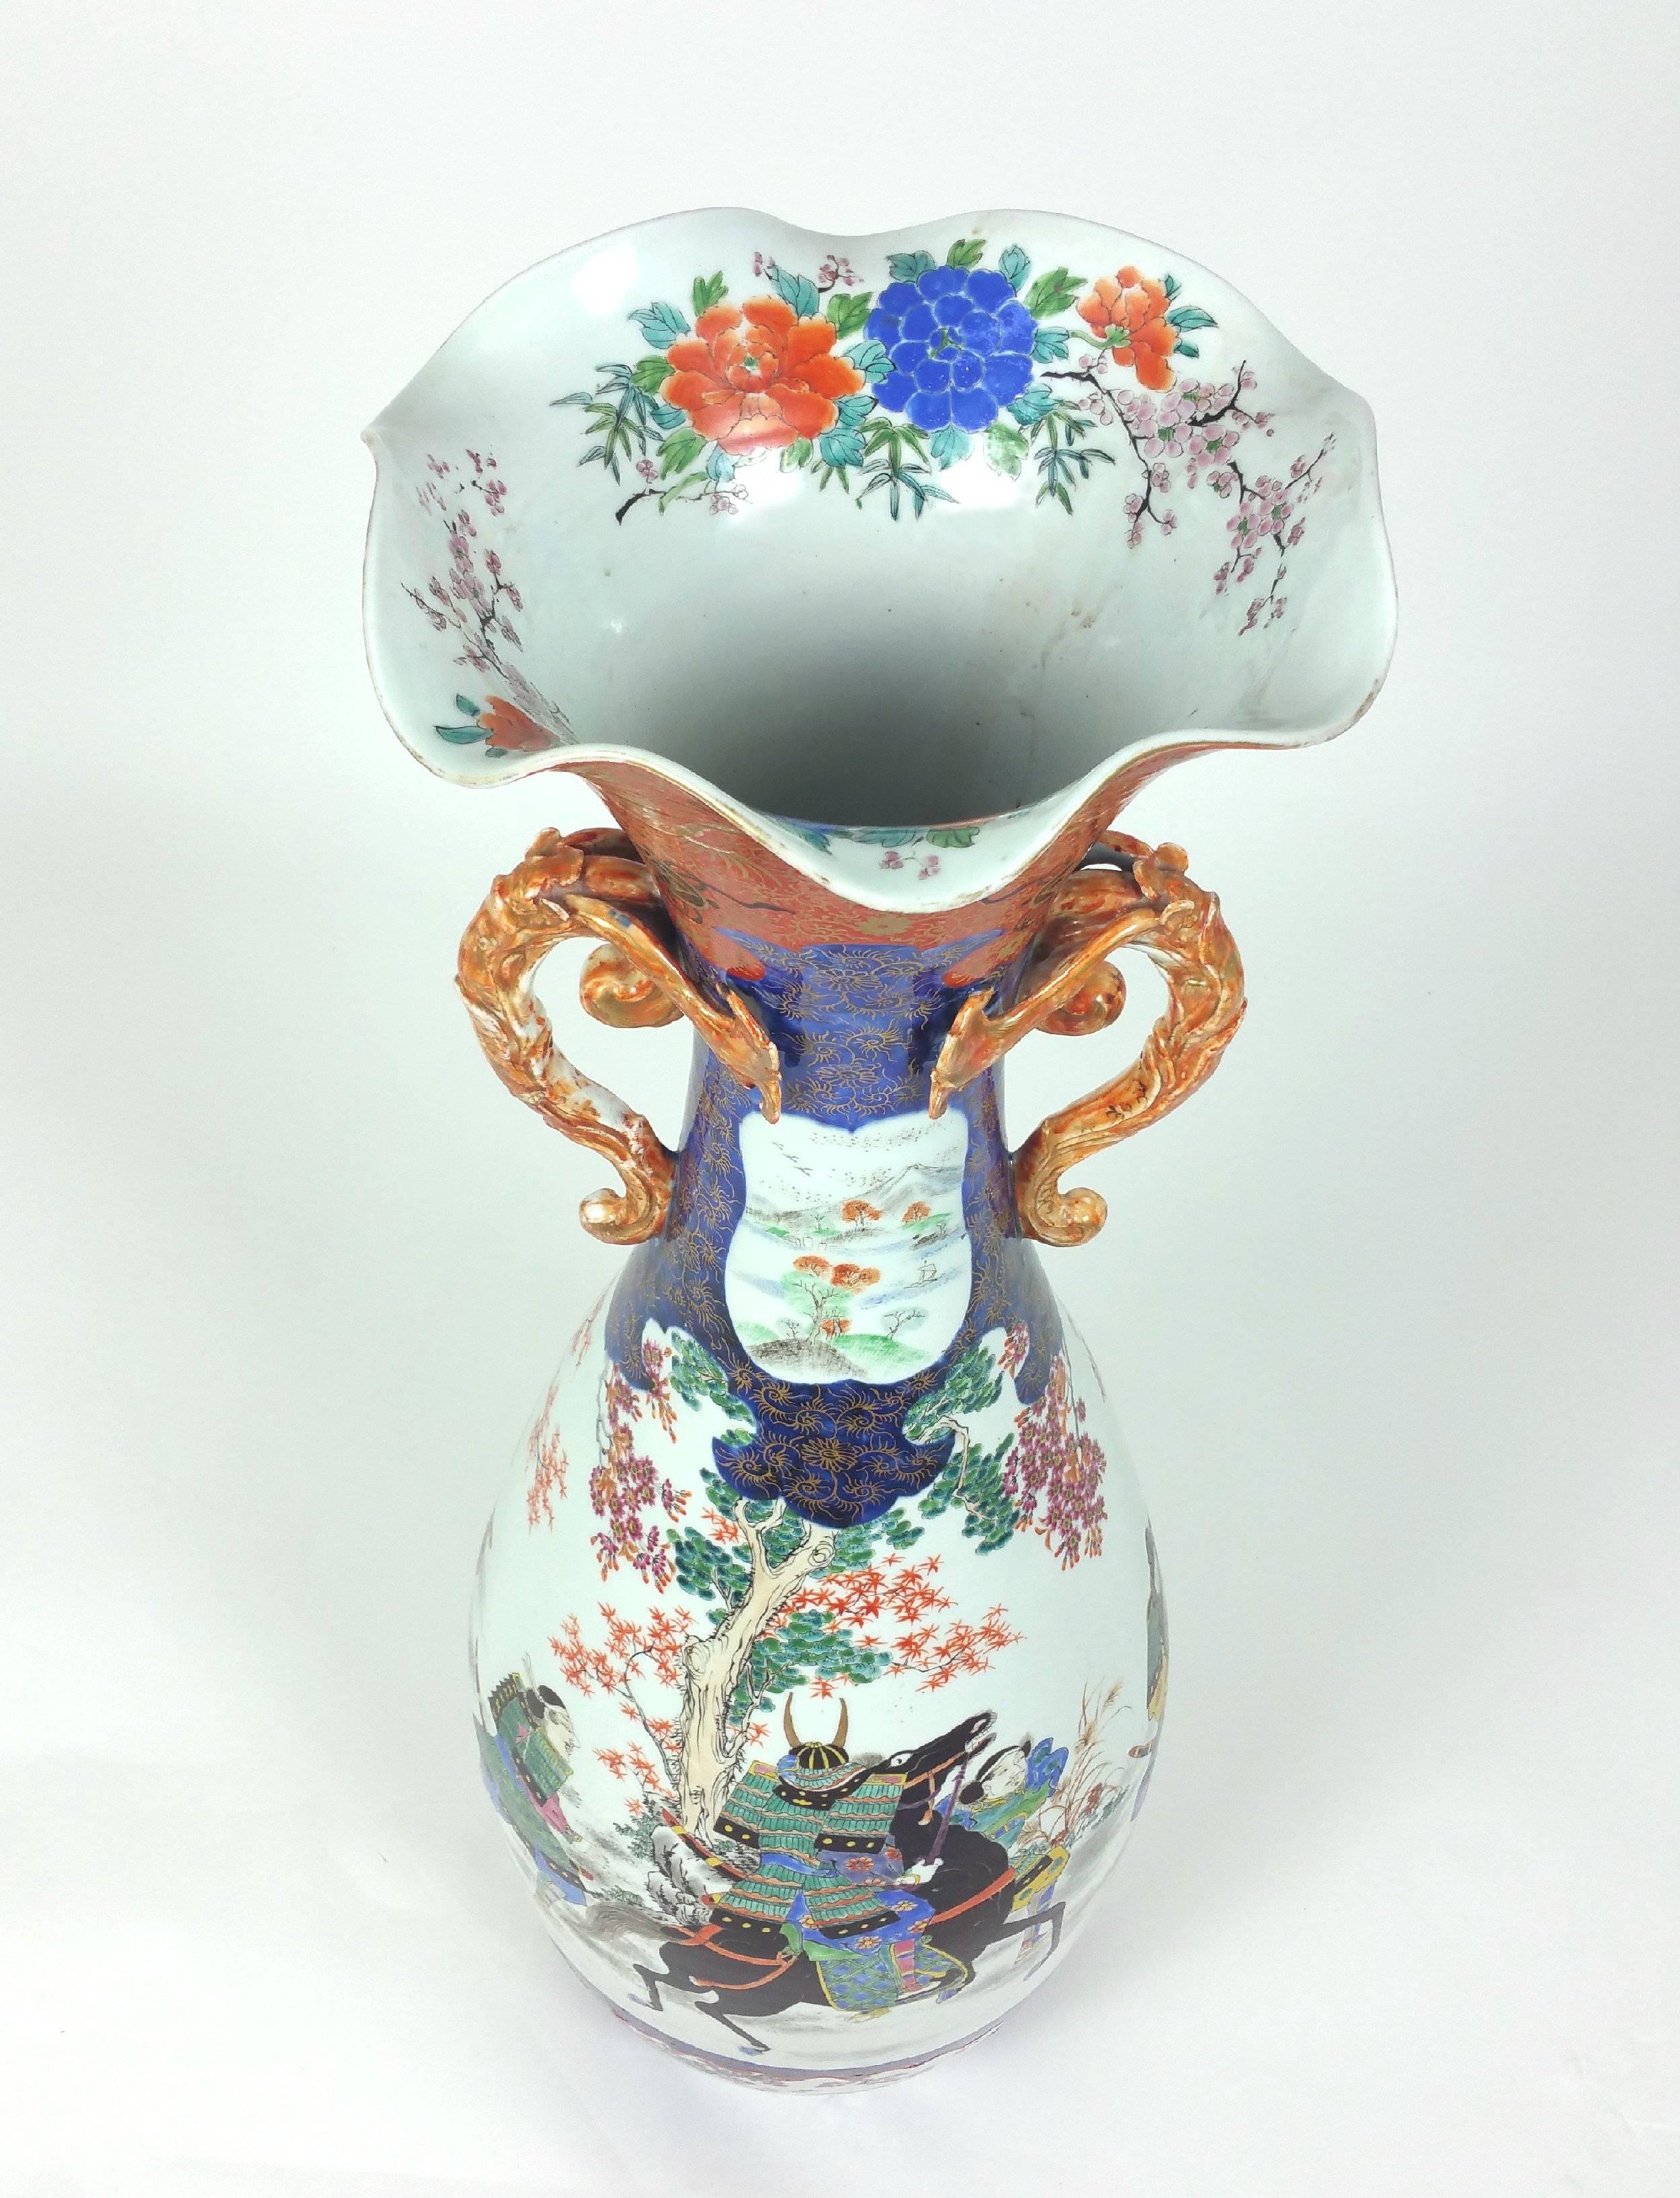 This large and impressive 19th century Japanese twin handled vase is hand-painted in enamels with samurai warriors and horses with floral borders in stunning detail and vivid color, with markings to the base. It measures 12 in – 30.5 cm in diameter